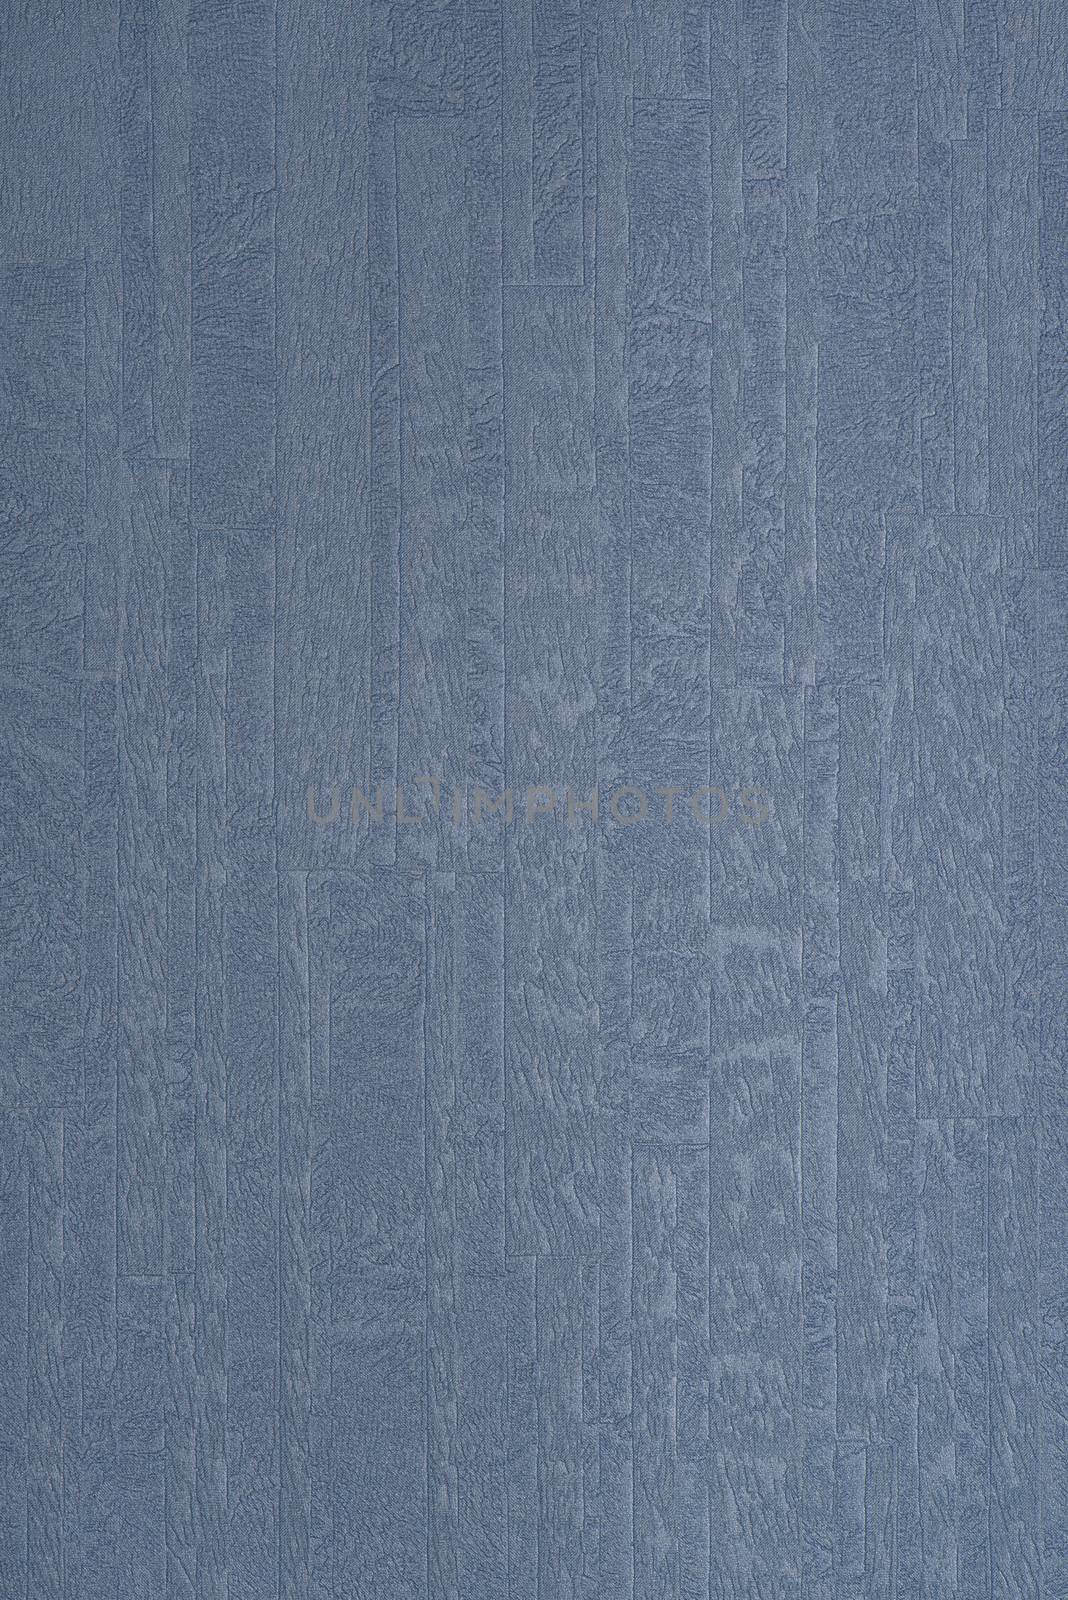 Blue wallpaper embossed texture for background.